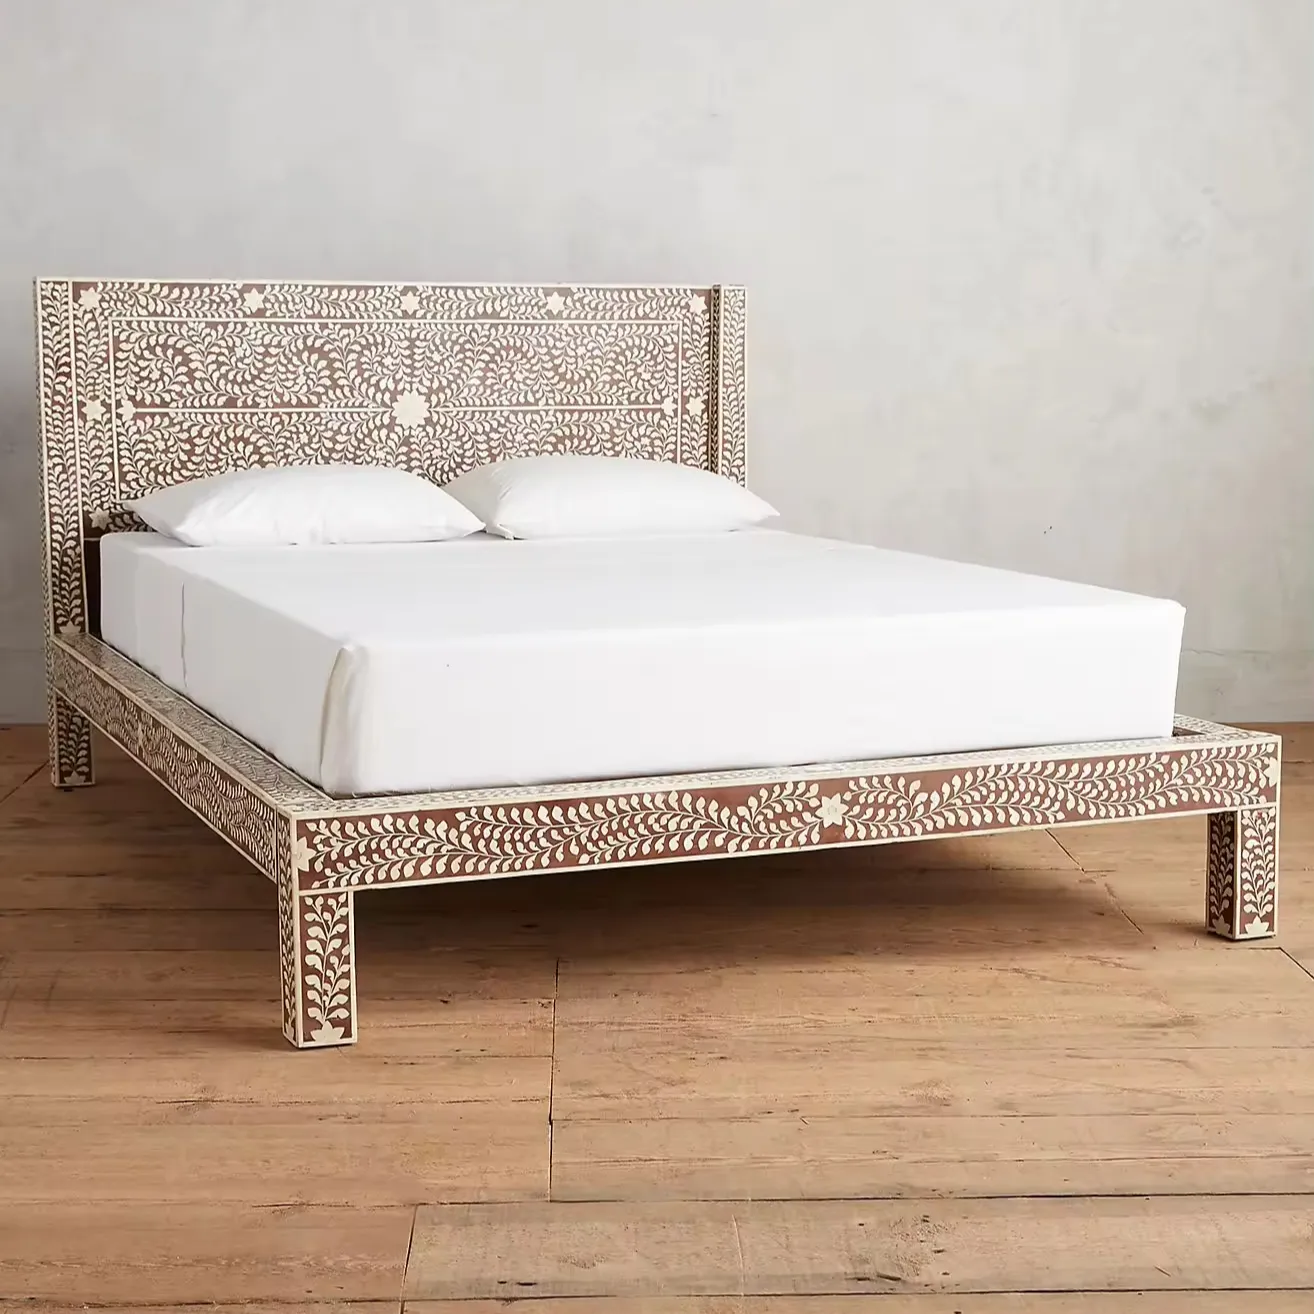 High Quality Product Handmade Bone Inlay Indian Bedroom Bed Floral Pattern Design Modern Luxury Natural Color Classic Furniture